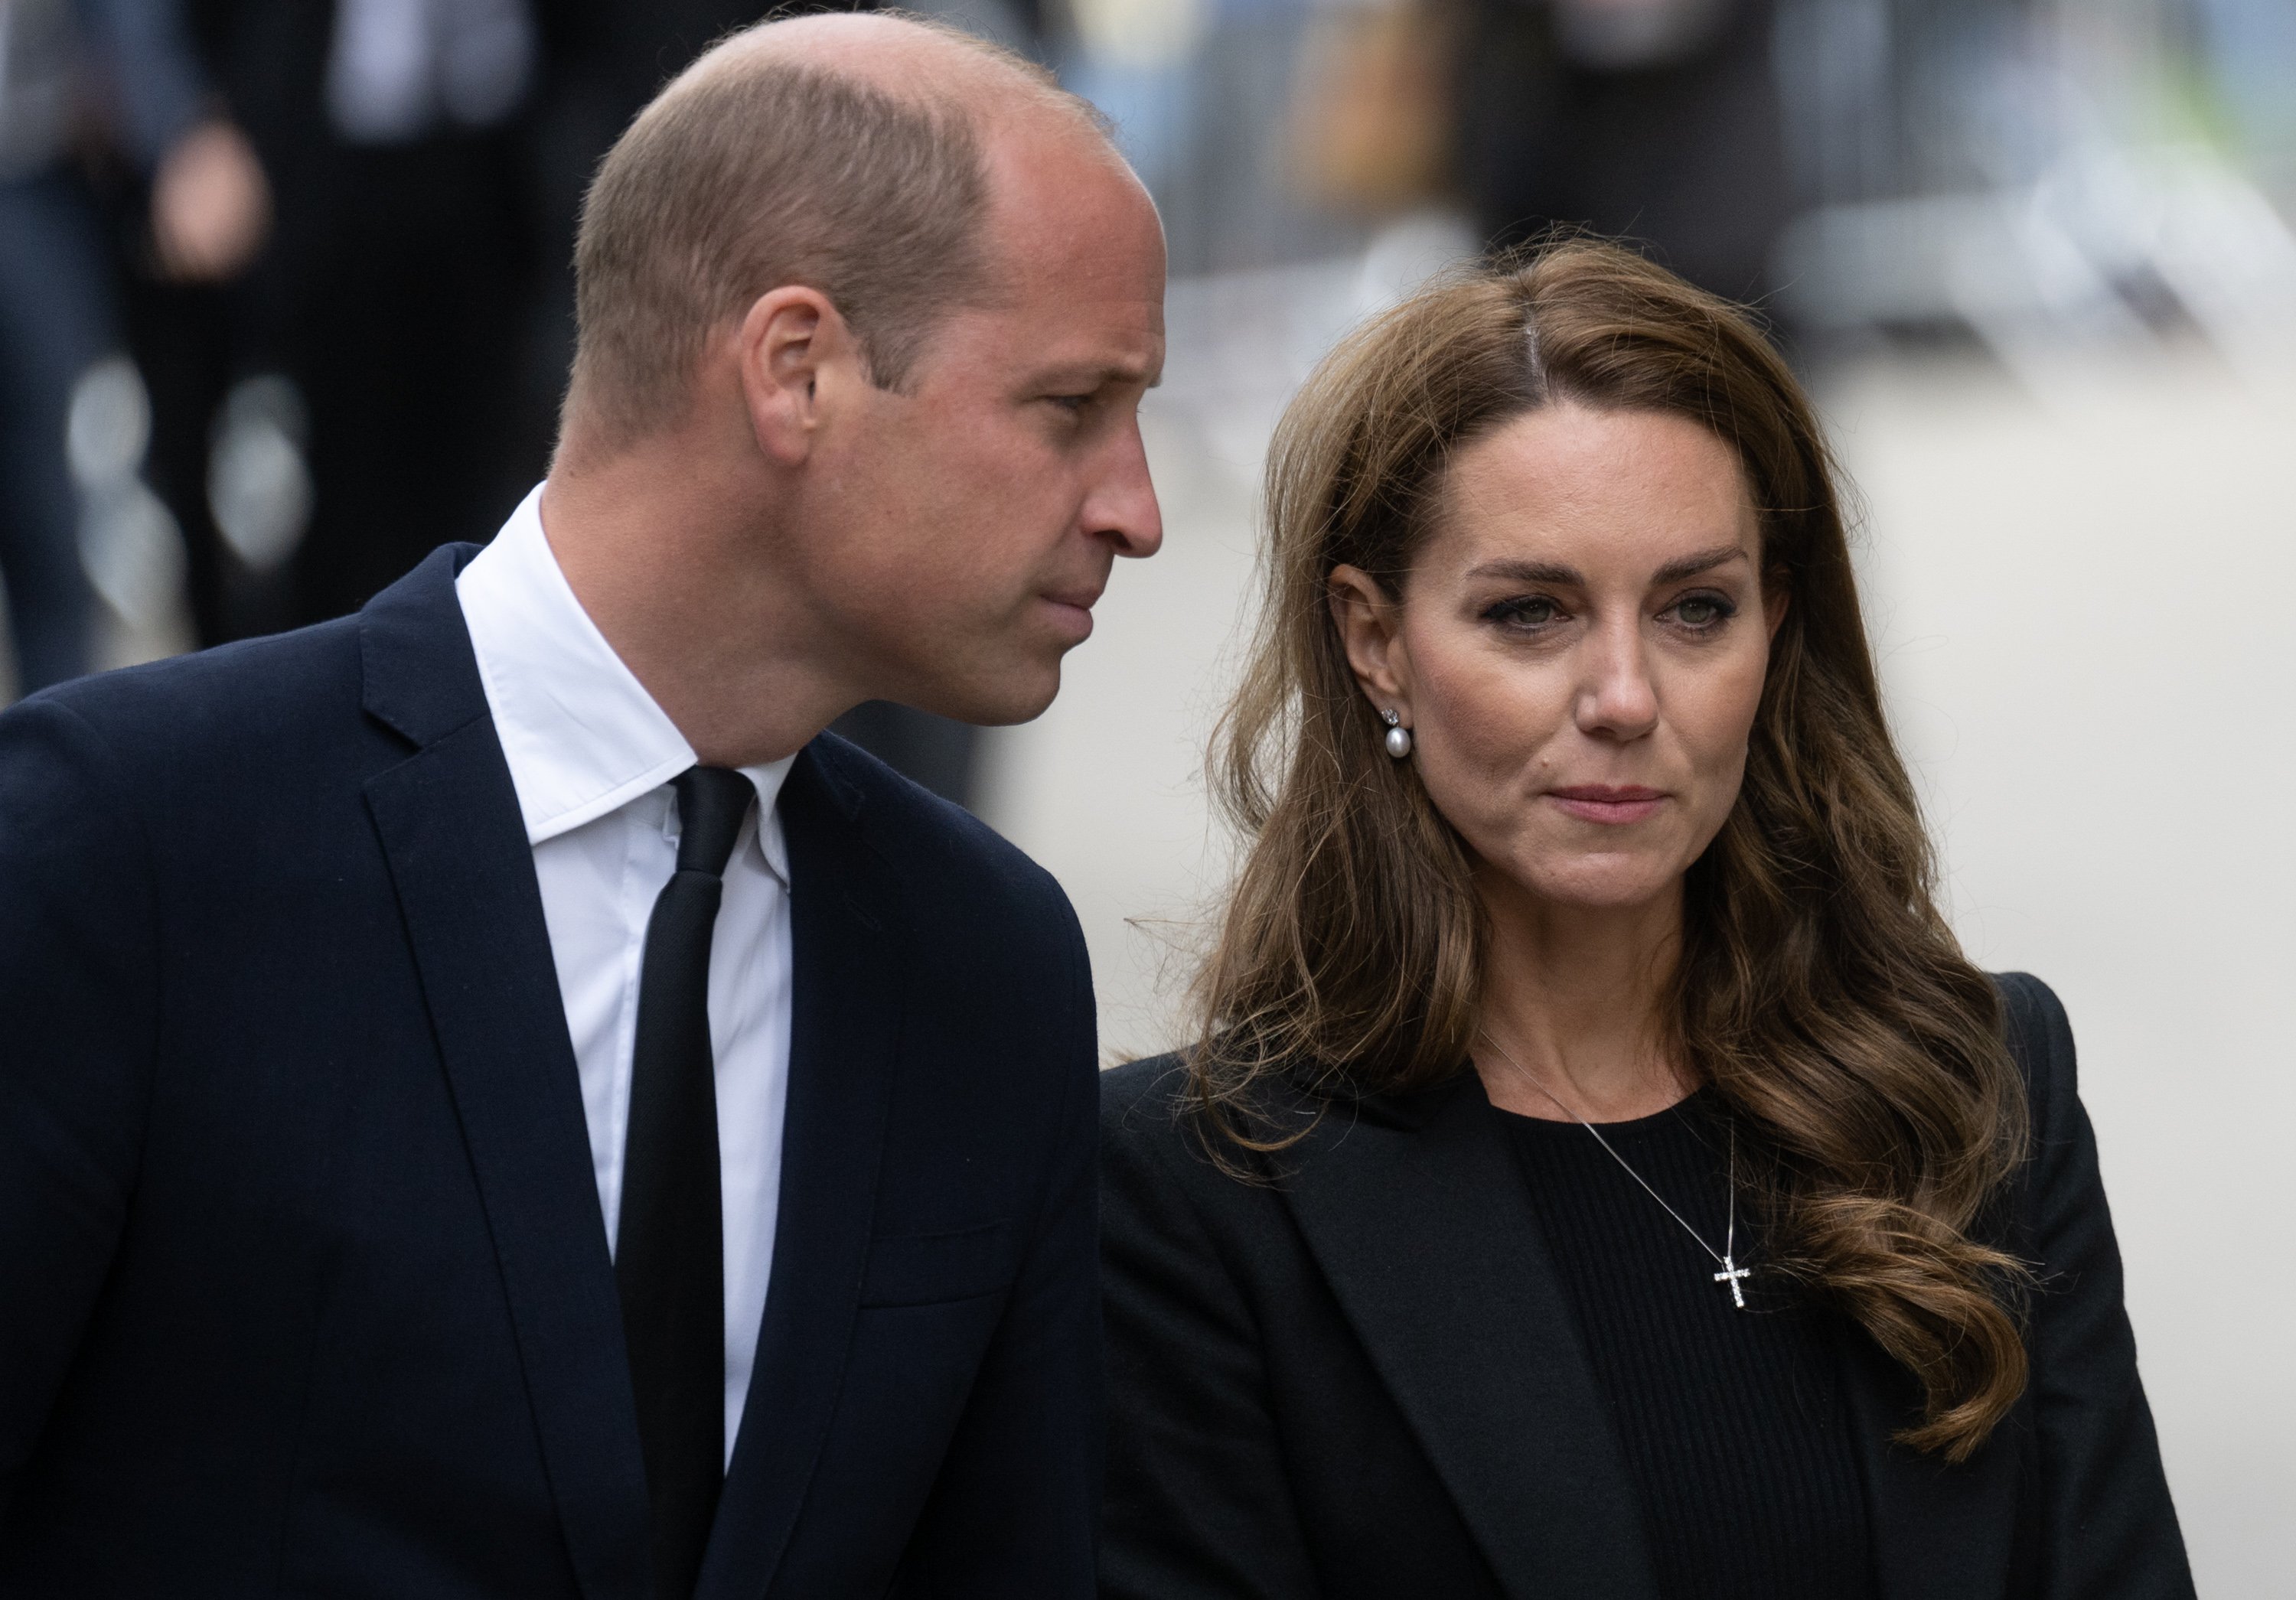 Prince William and Kate Middleton attend funeral services for Queen Elizabeth III.